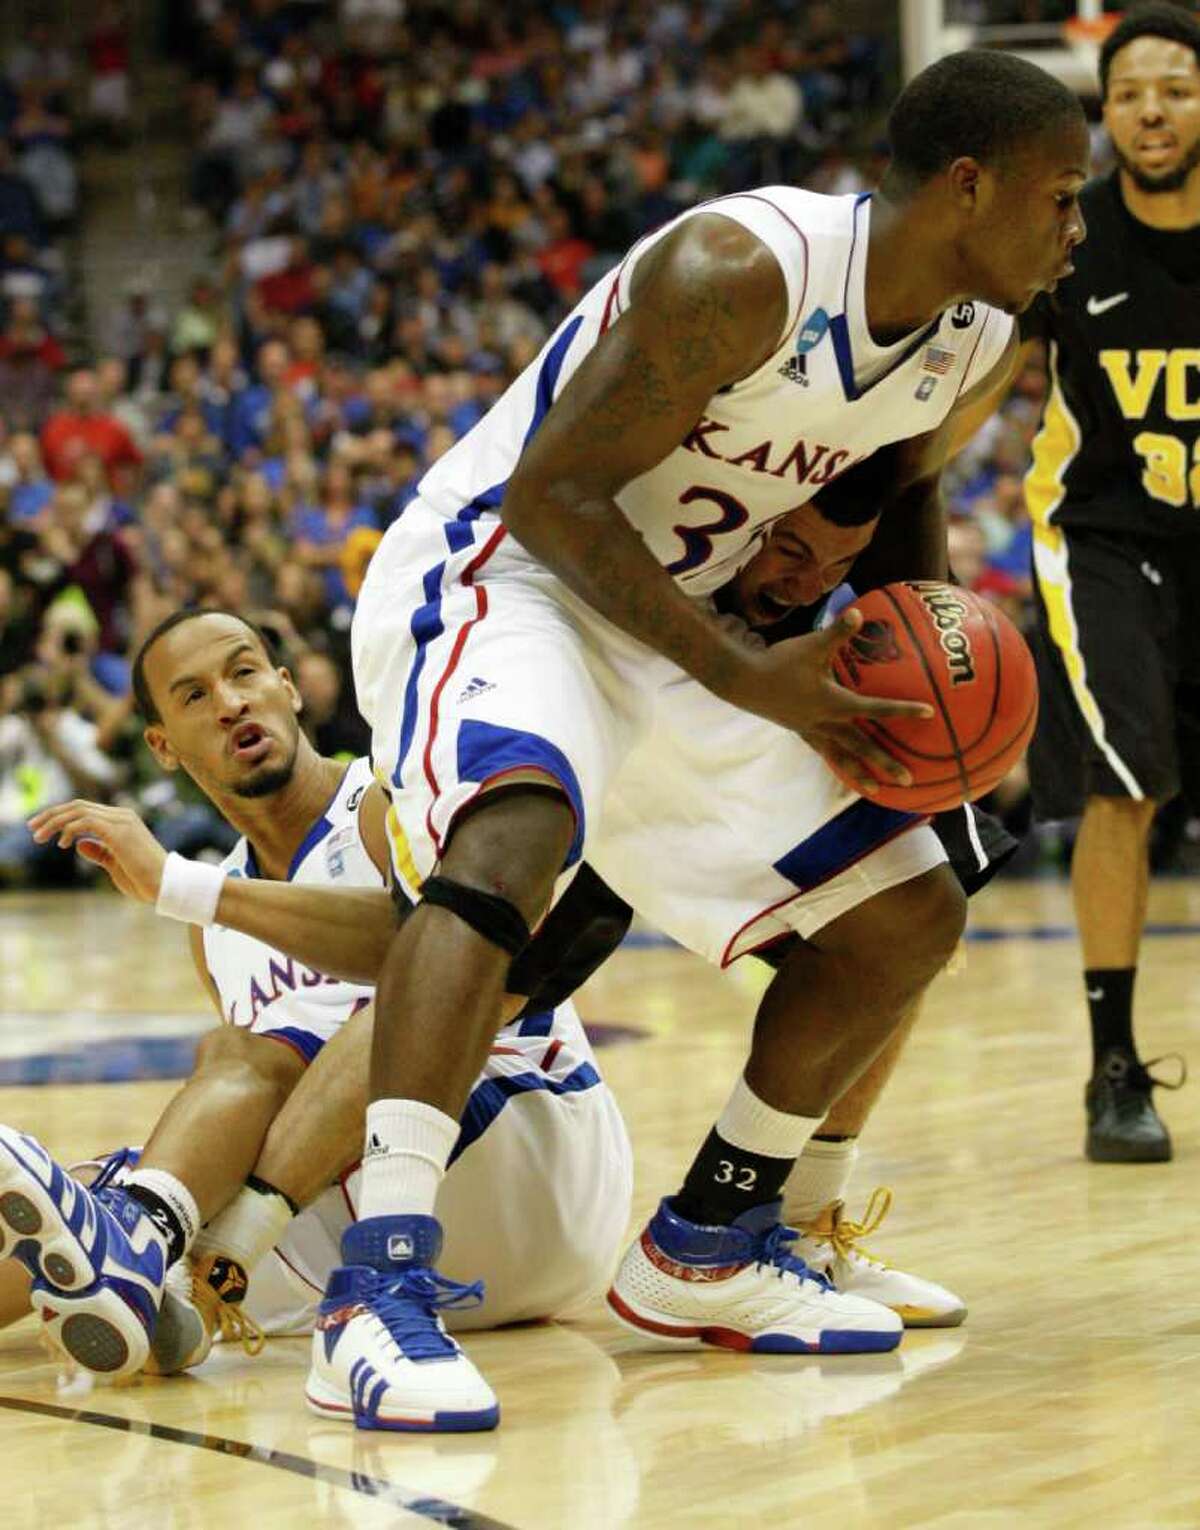 Kansas guard Josh Selby (32) gets tangled up with Virginia Commonwealth guard Joey Rodriguez (12) and Kansas guard Travis Releford (24) during the first half of the NCAA Southwest Regional final in San Antonio, Texas on Sunday, March 27, 2011. (Jerry Lara/glara@express-news.net)